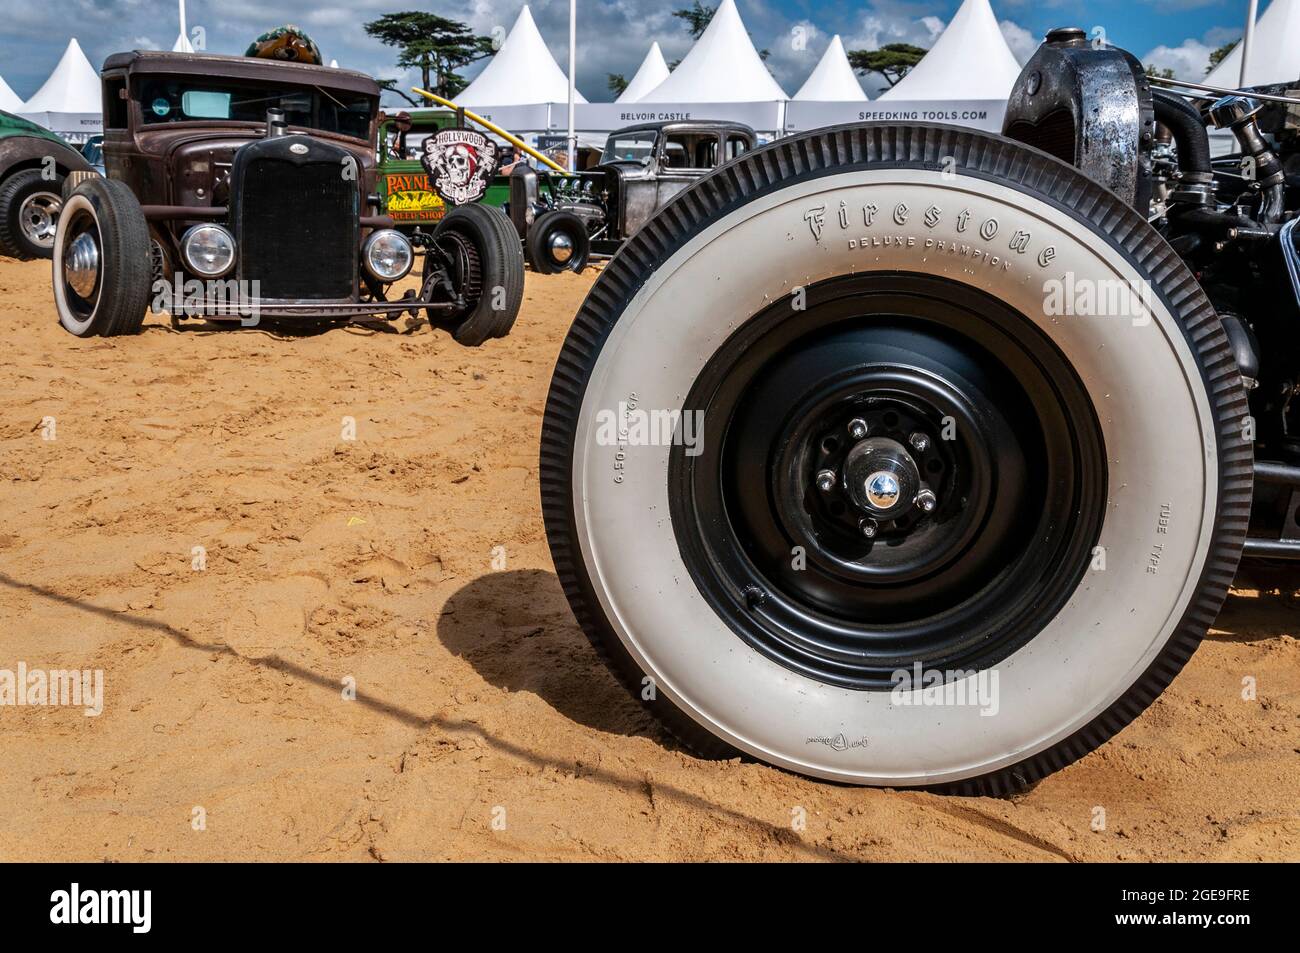 Custom drag racing cars on a beach scenario at the Goodwood Festival of Speed motor racing event 2014. Whitewall Firestone tire, tyre Stock Photo